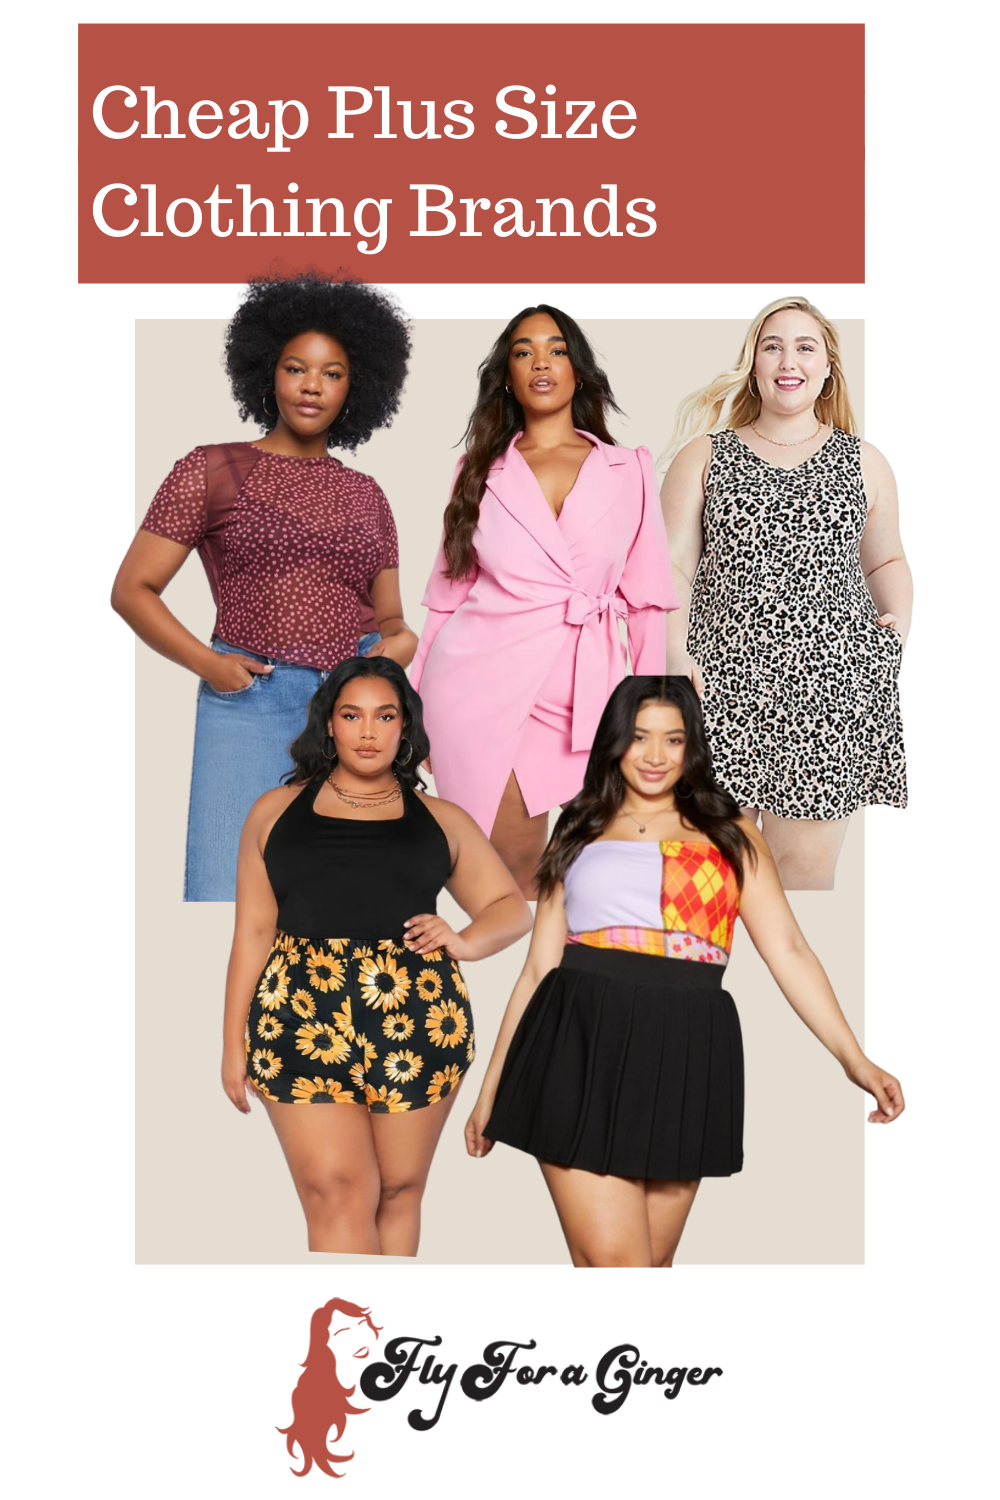 Cheap Plus Size Clothing Brands // Where to Find Cheap Plus Size Clothes